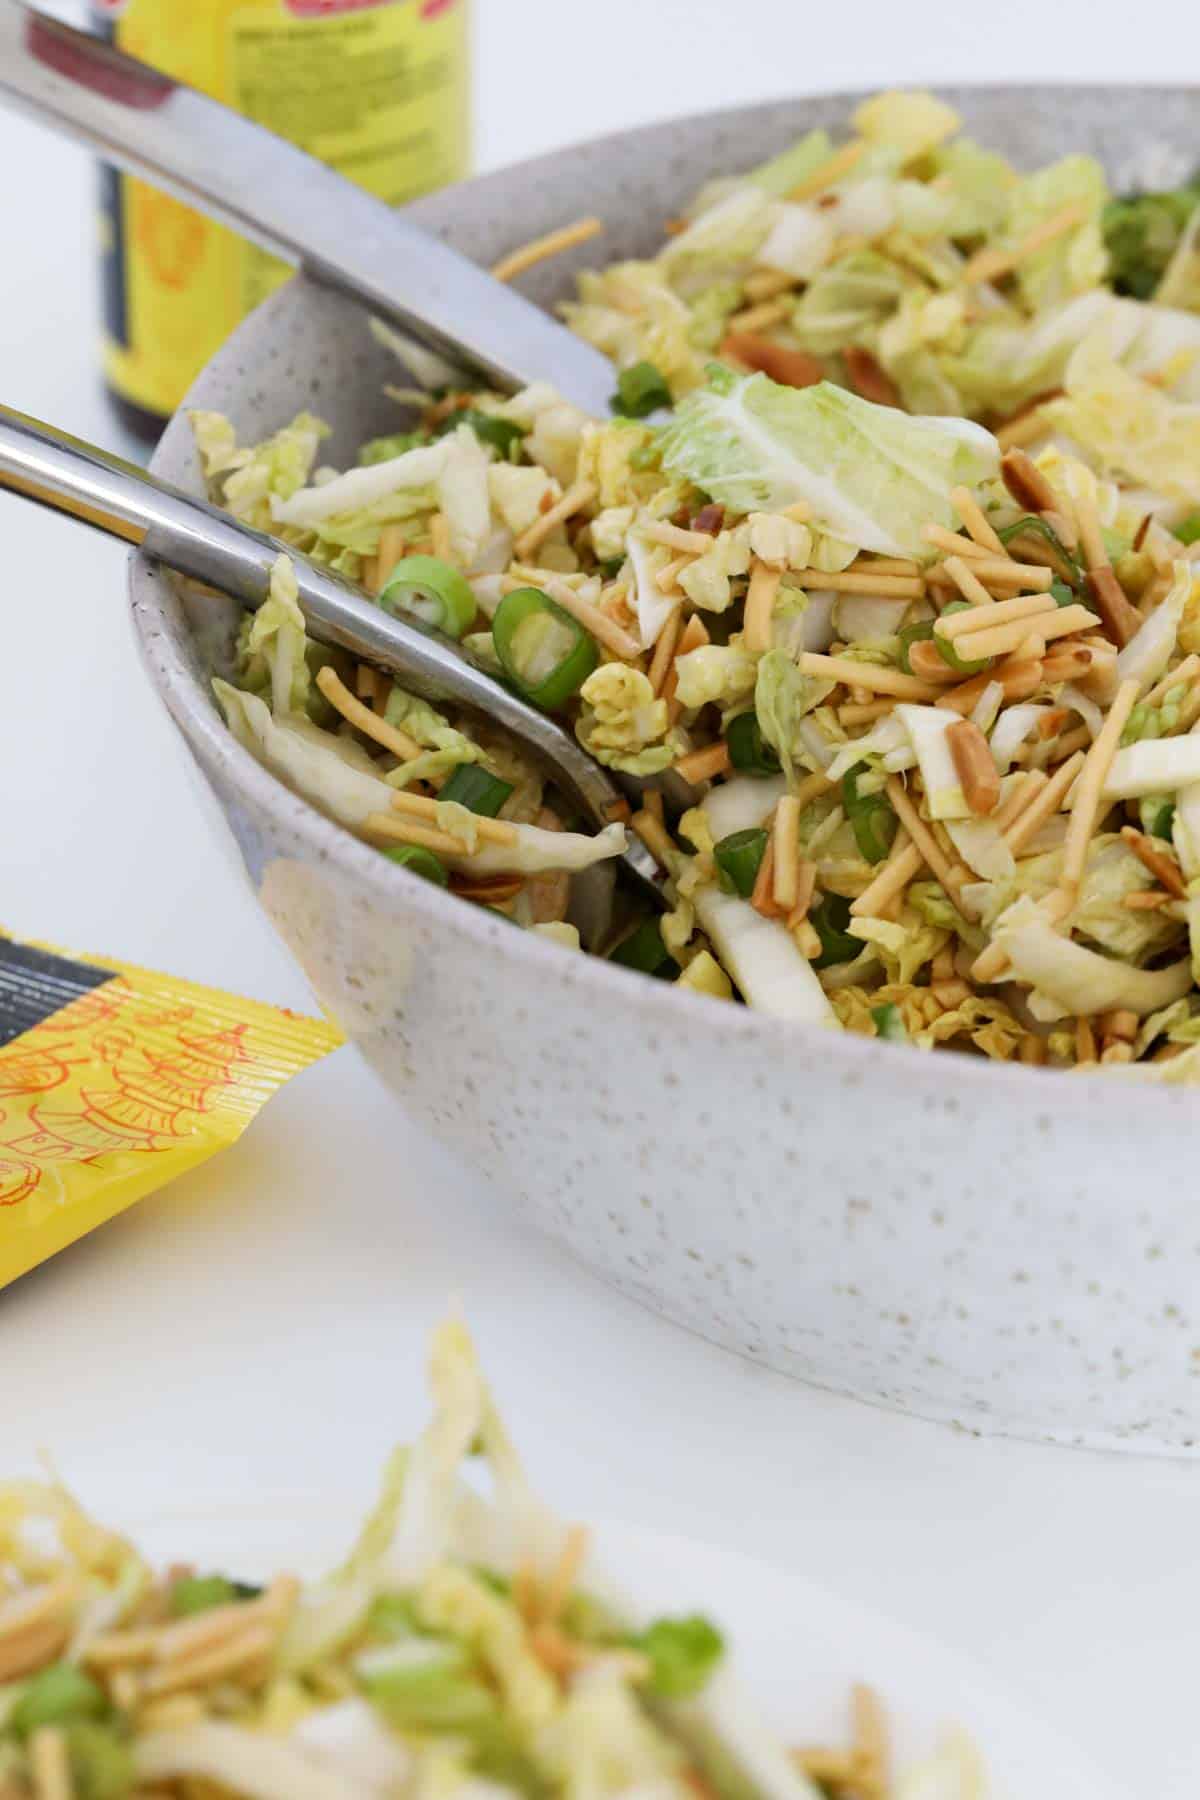 A bowl of cabbage salad topped with fried noodles and toasted almonds.